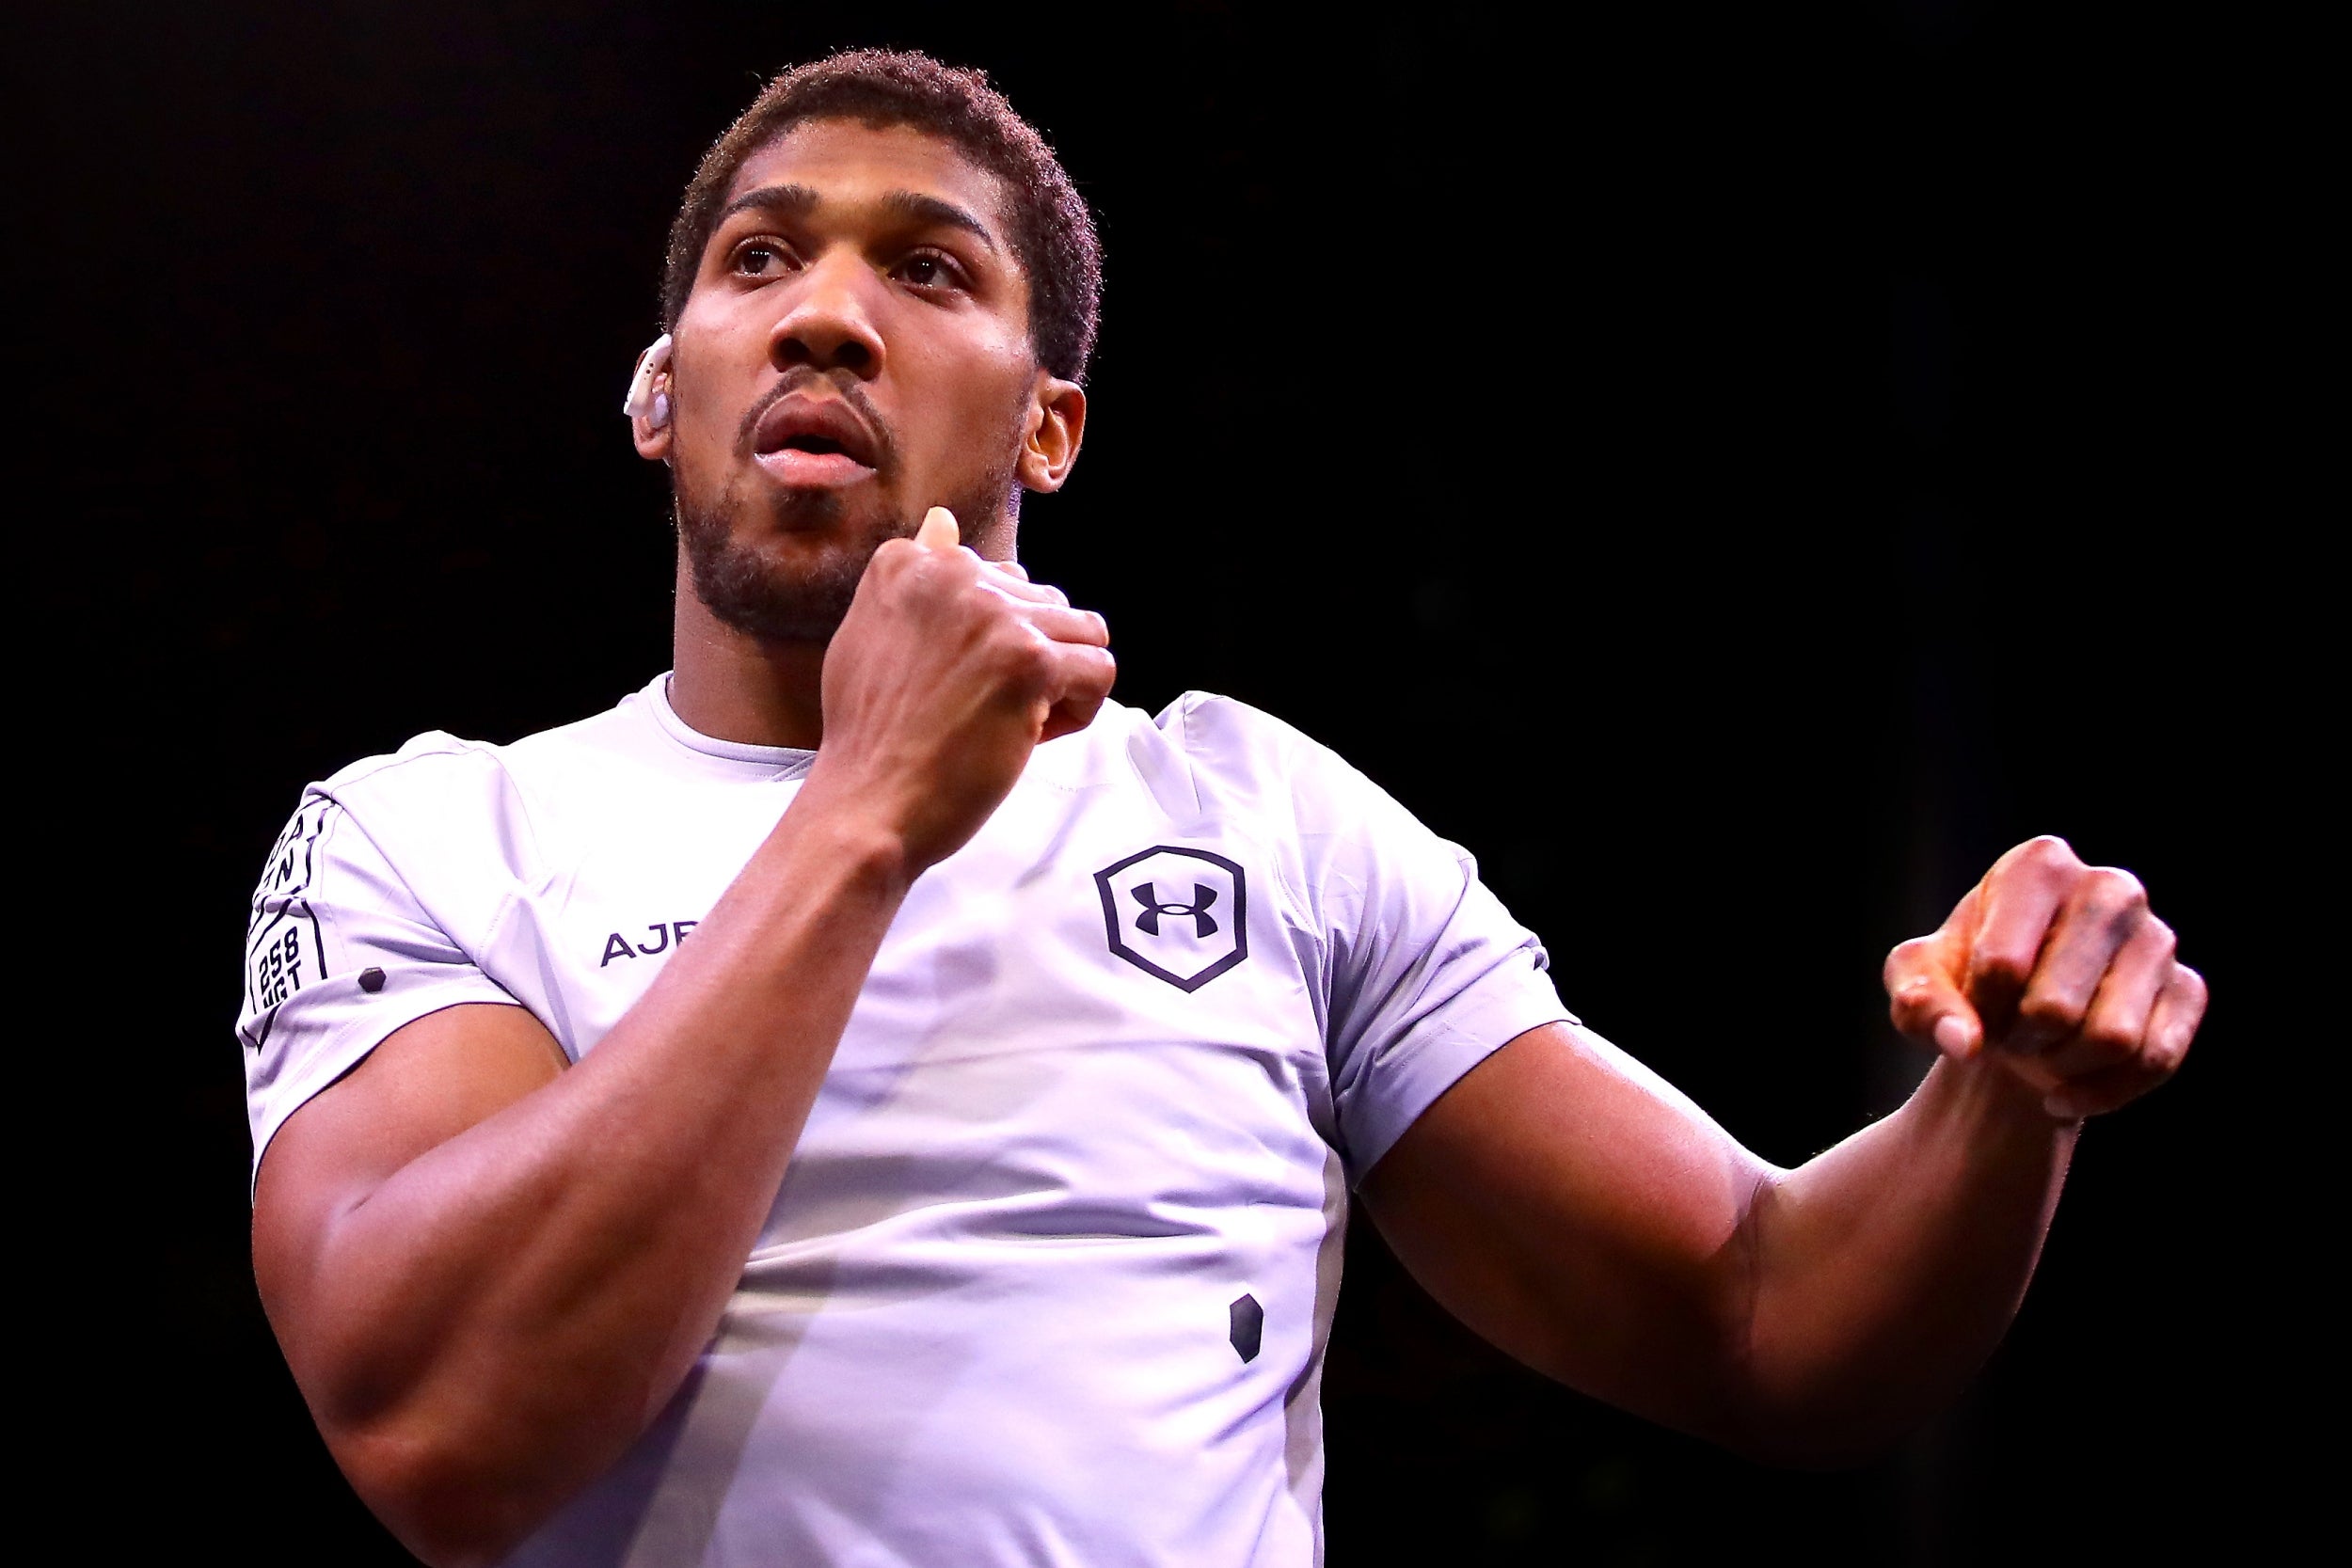 Anthony Joshua at the public workout ahead of the rematch (Getty)